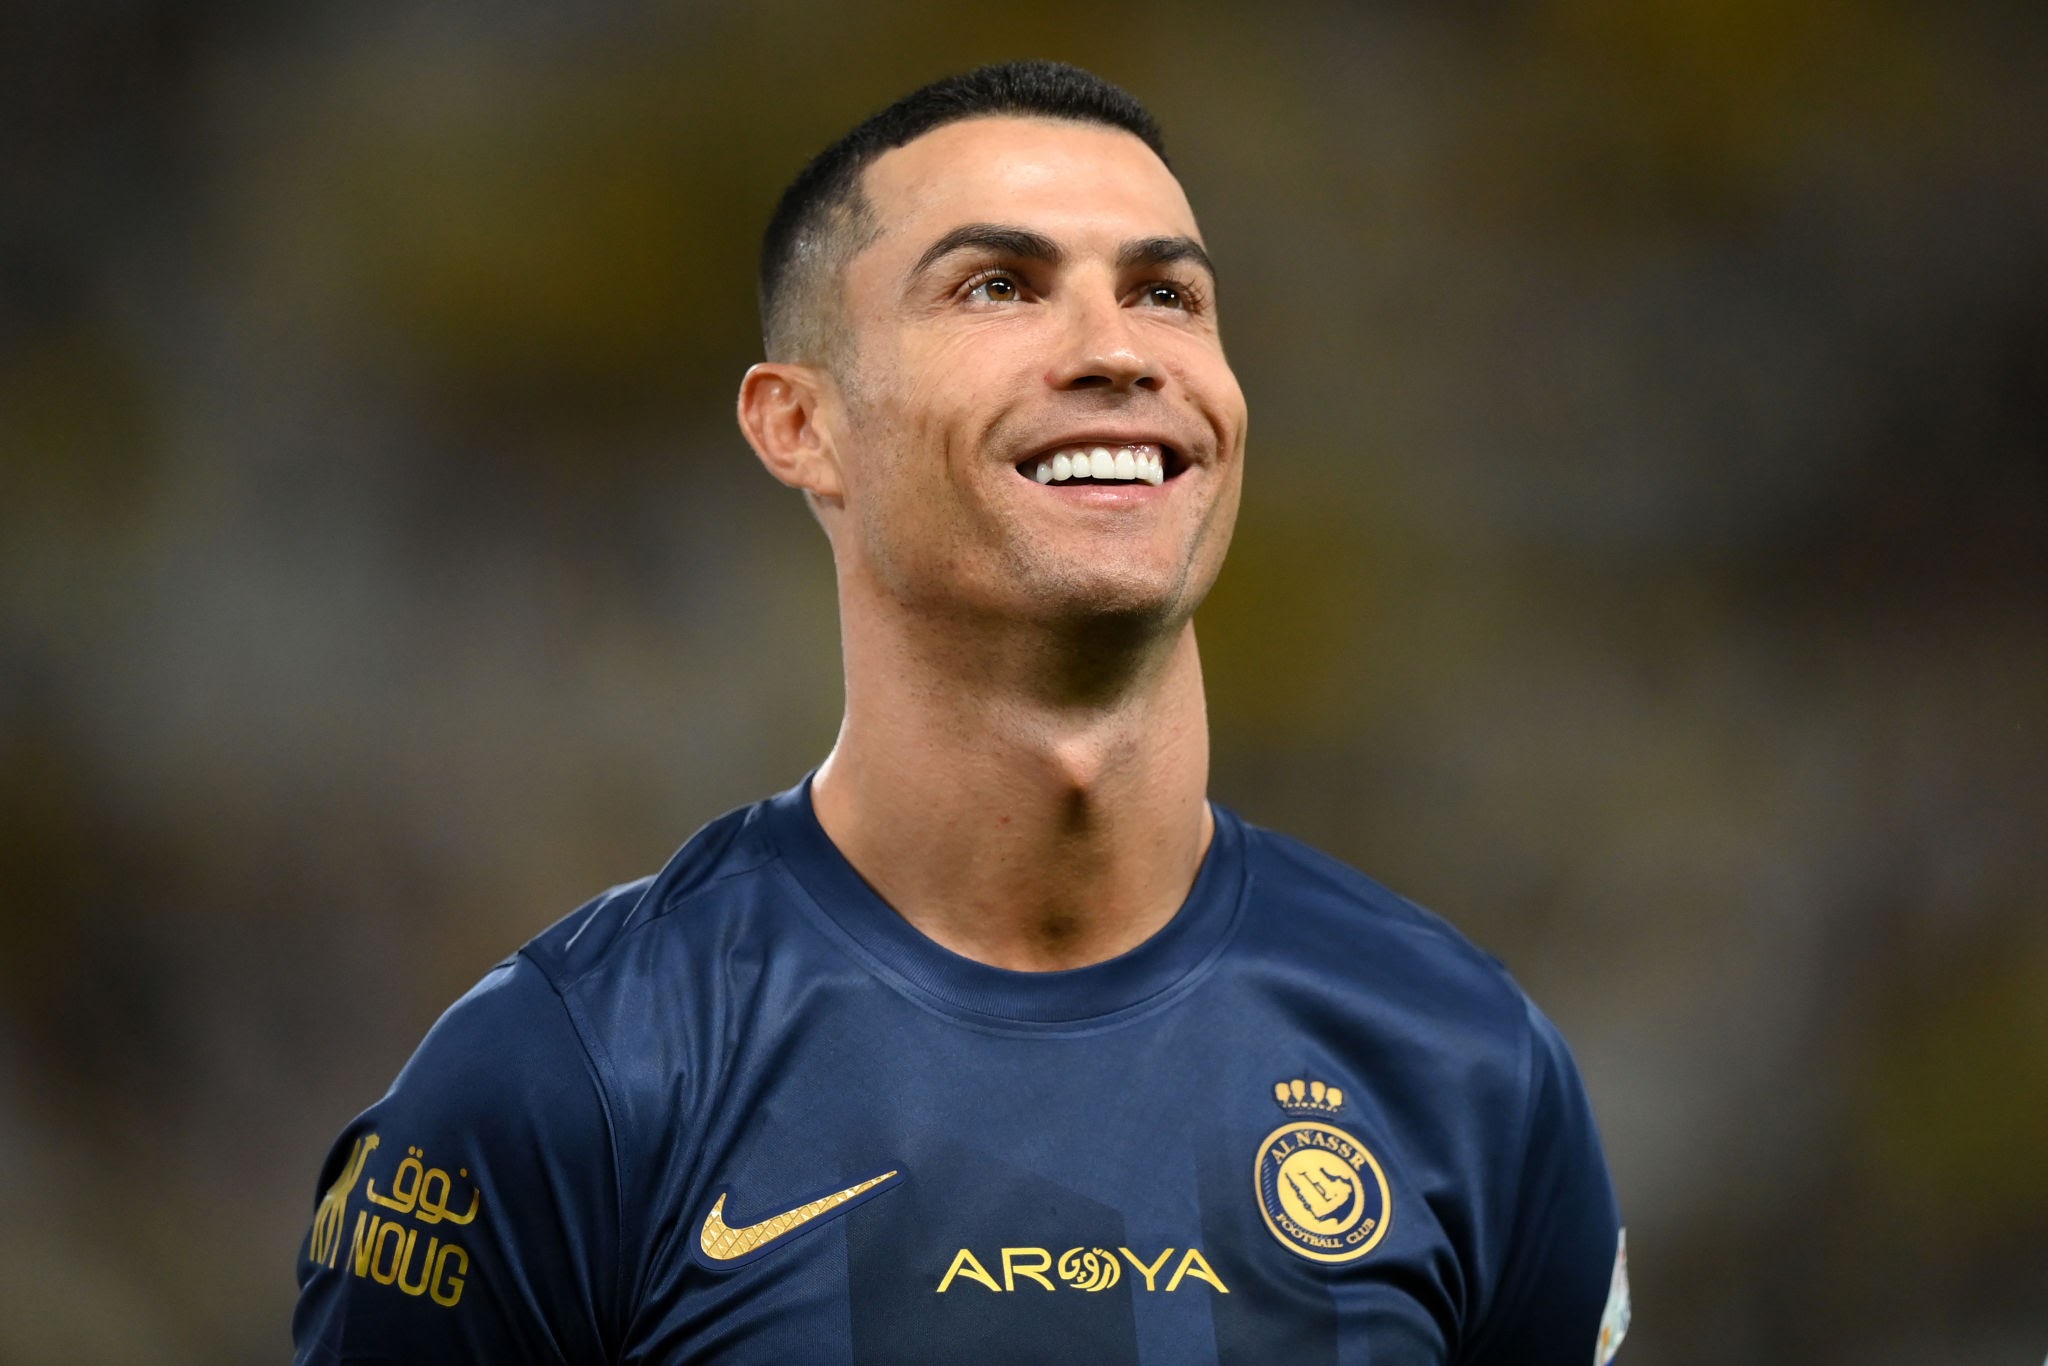 WATCH: Cristiano Ronaldo attempts to silence Lionel Messi chants from  Al-Ettifaq fans during bad-tempered display for Al-Nassr | Goal.com US